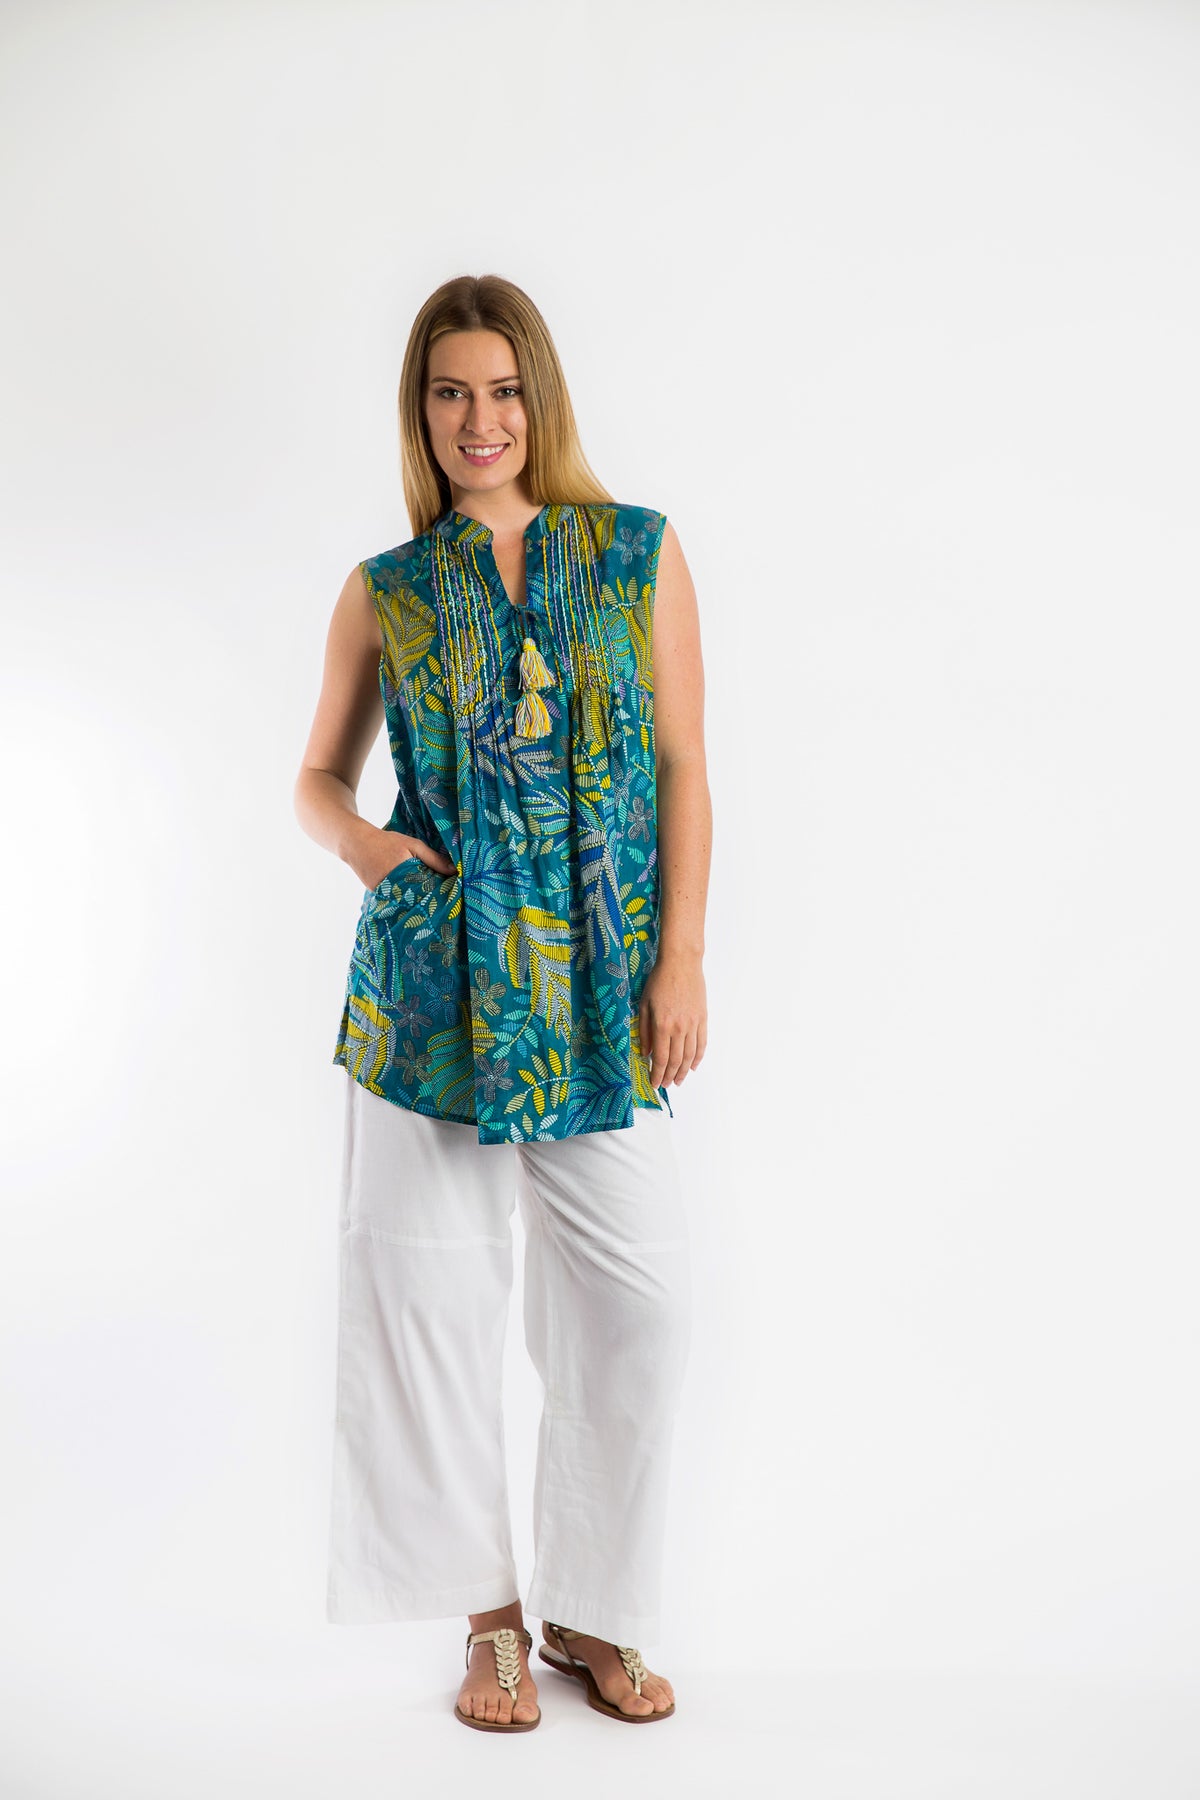 Casuarina Embroidered Sleeveless Mid-length Top in Turquoise Fern